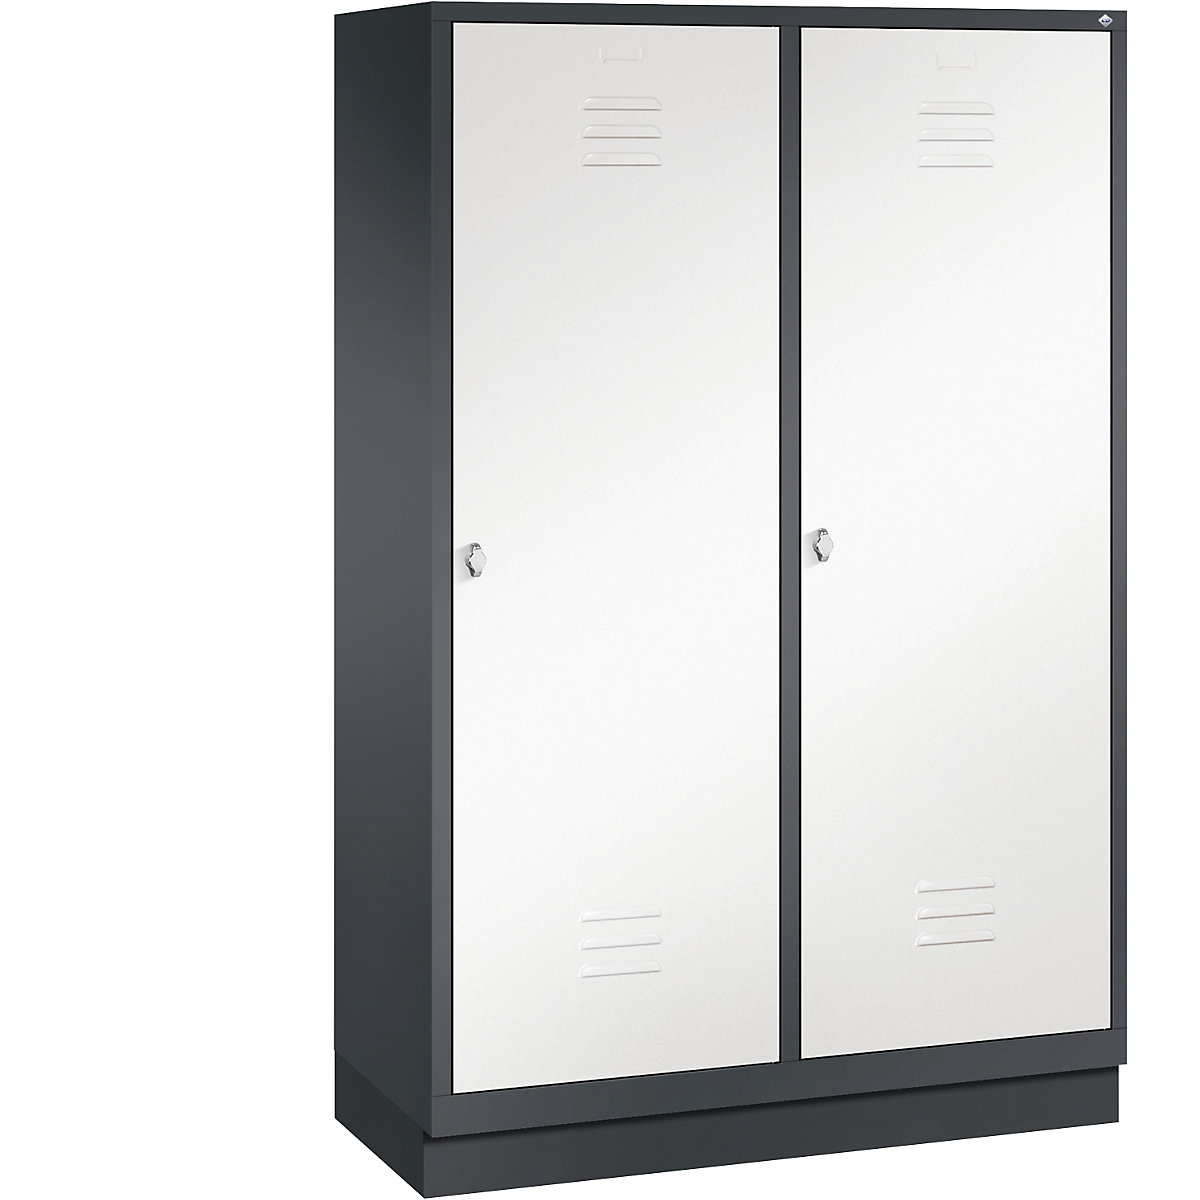 CLASSIC cloakroom locker with plinth, door for 2 compartments – C+P, 4 compartments, compartment width 300 mm, black grey / traffic white-12